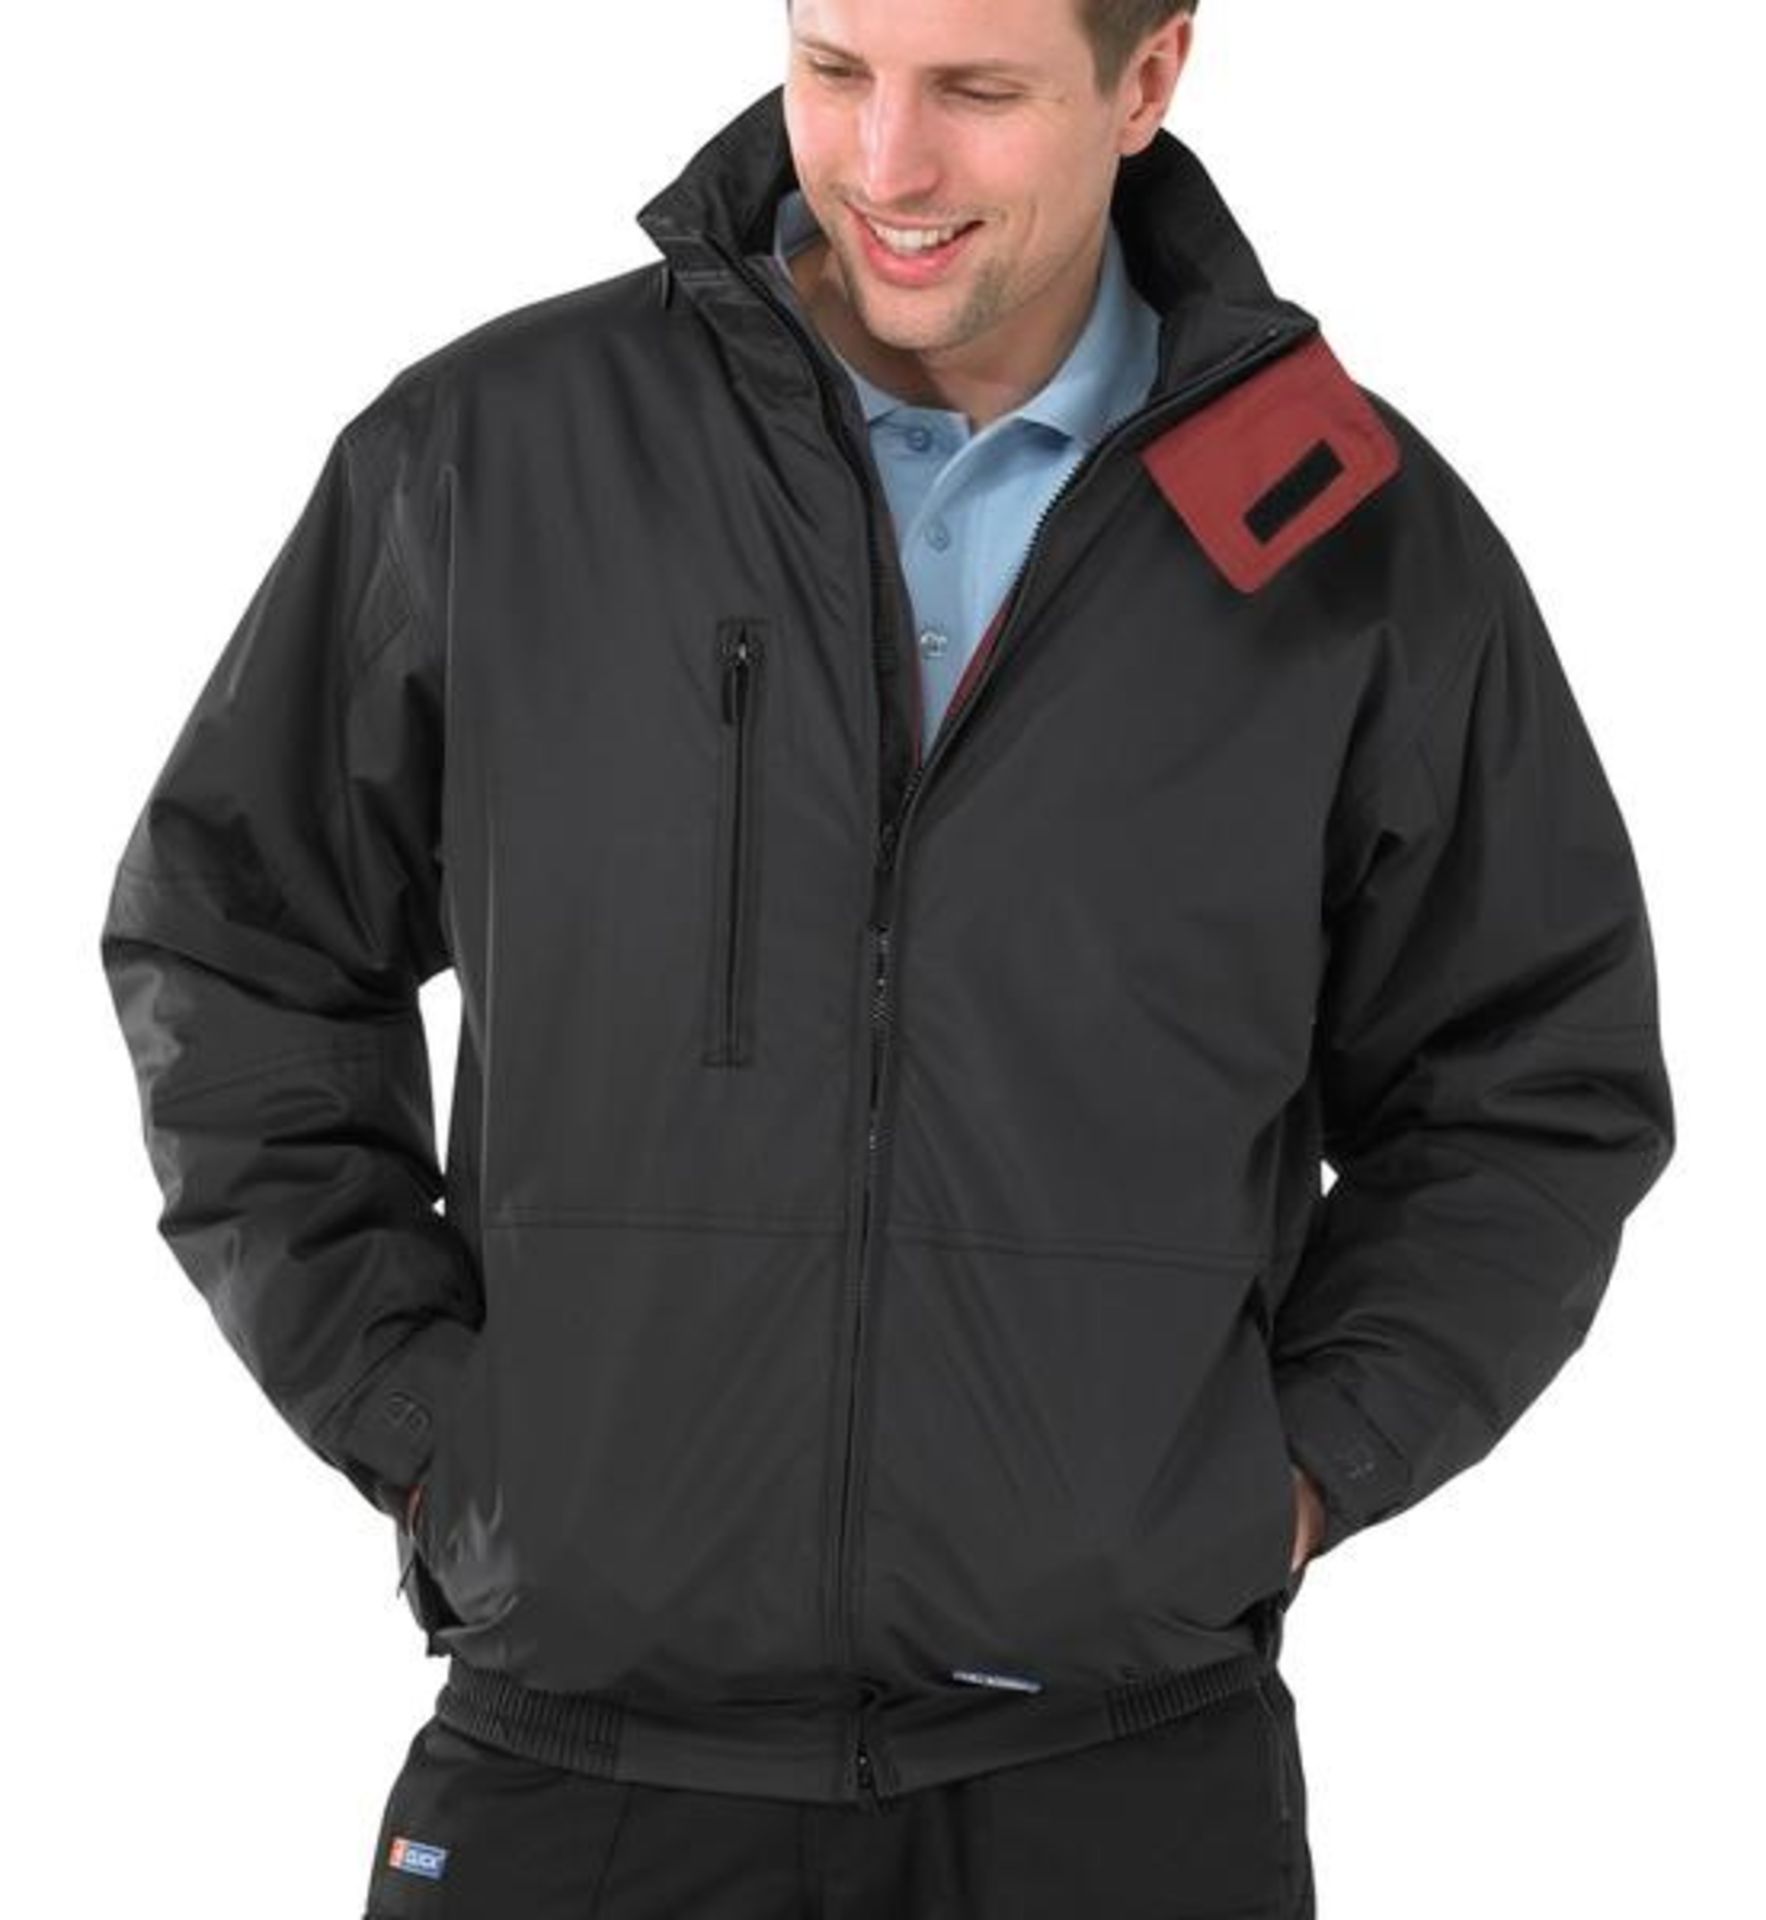 1 DRI MERCURY BOMBER WATERPROOF JACKET IN BLACK / SIZE L / RRP £22.57 (VIEWING HIGHLY RECOMMENDED)